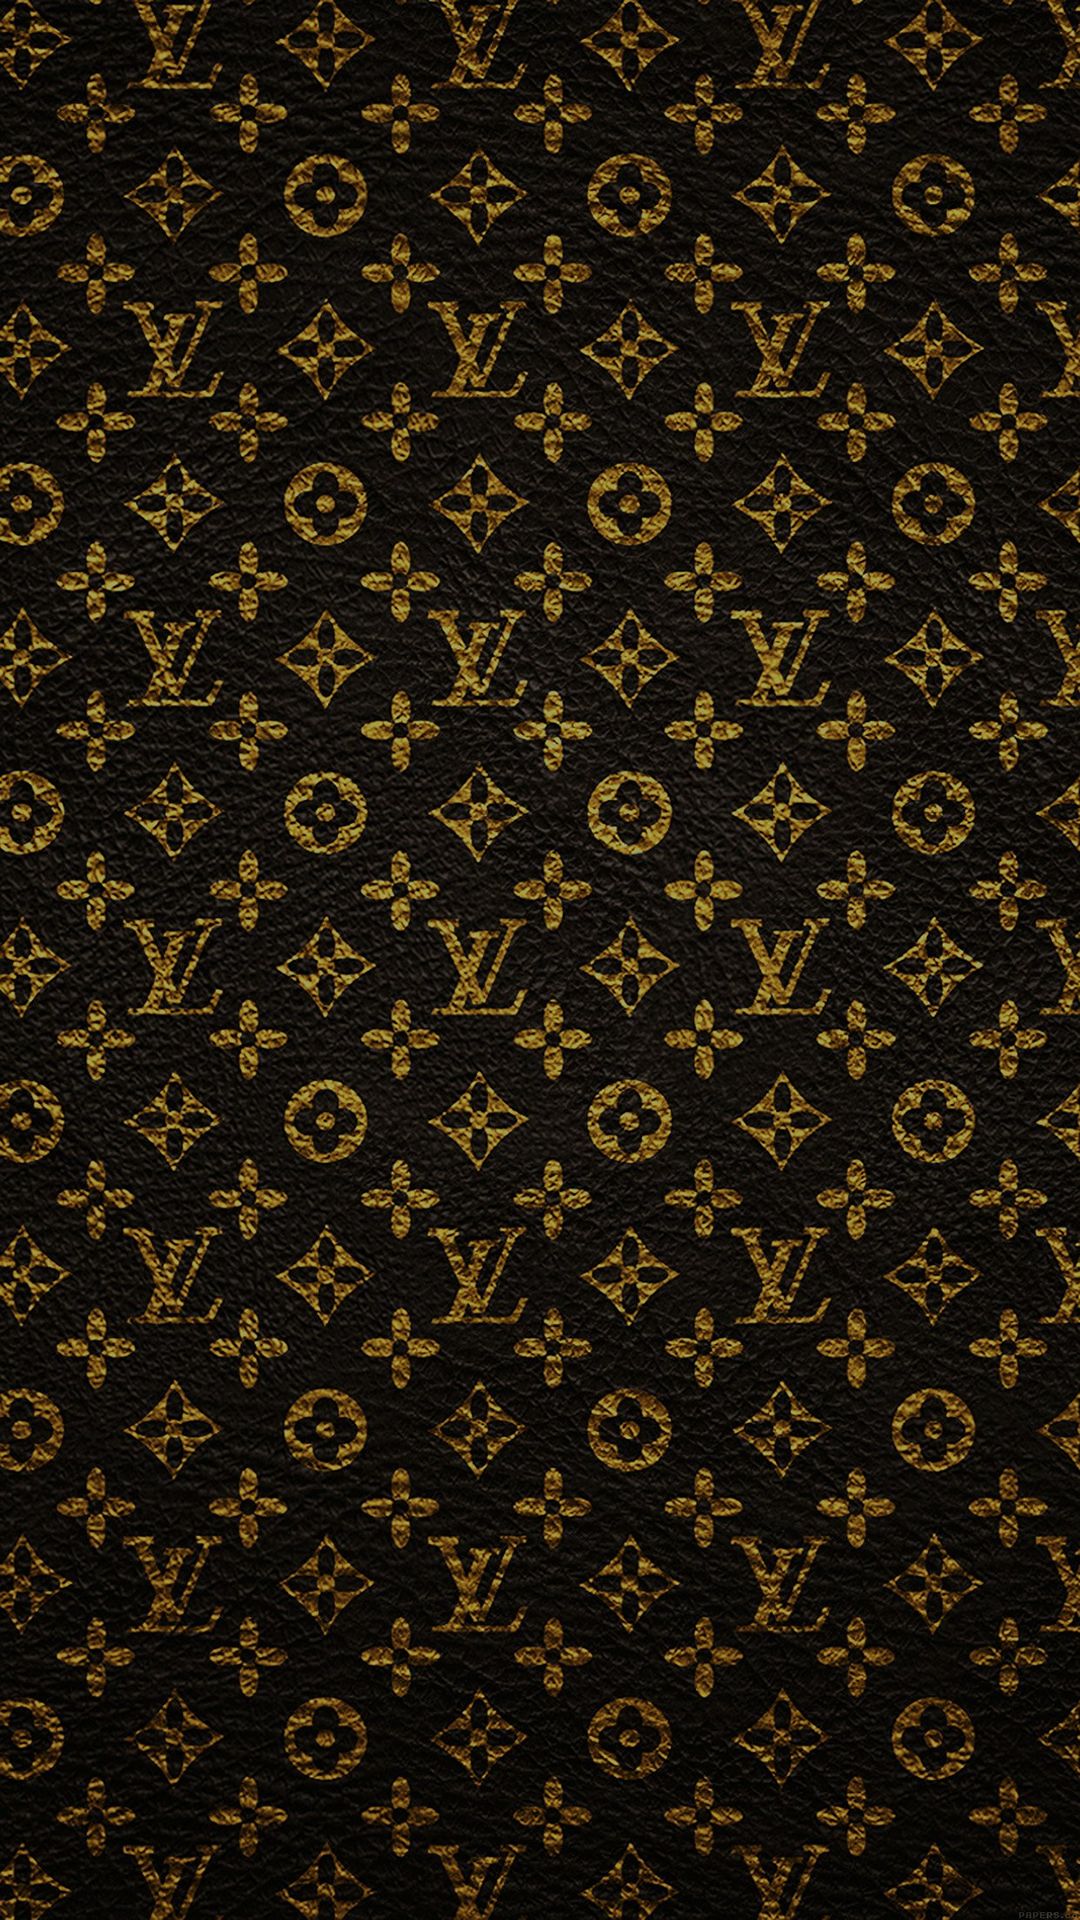 Louis Vuitton Aesthetic Wallpapers - Wallpaper Cave 931